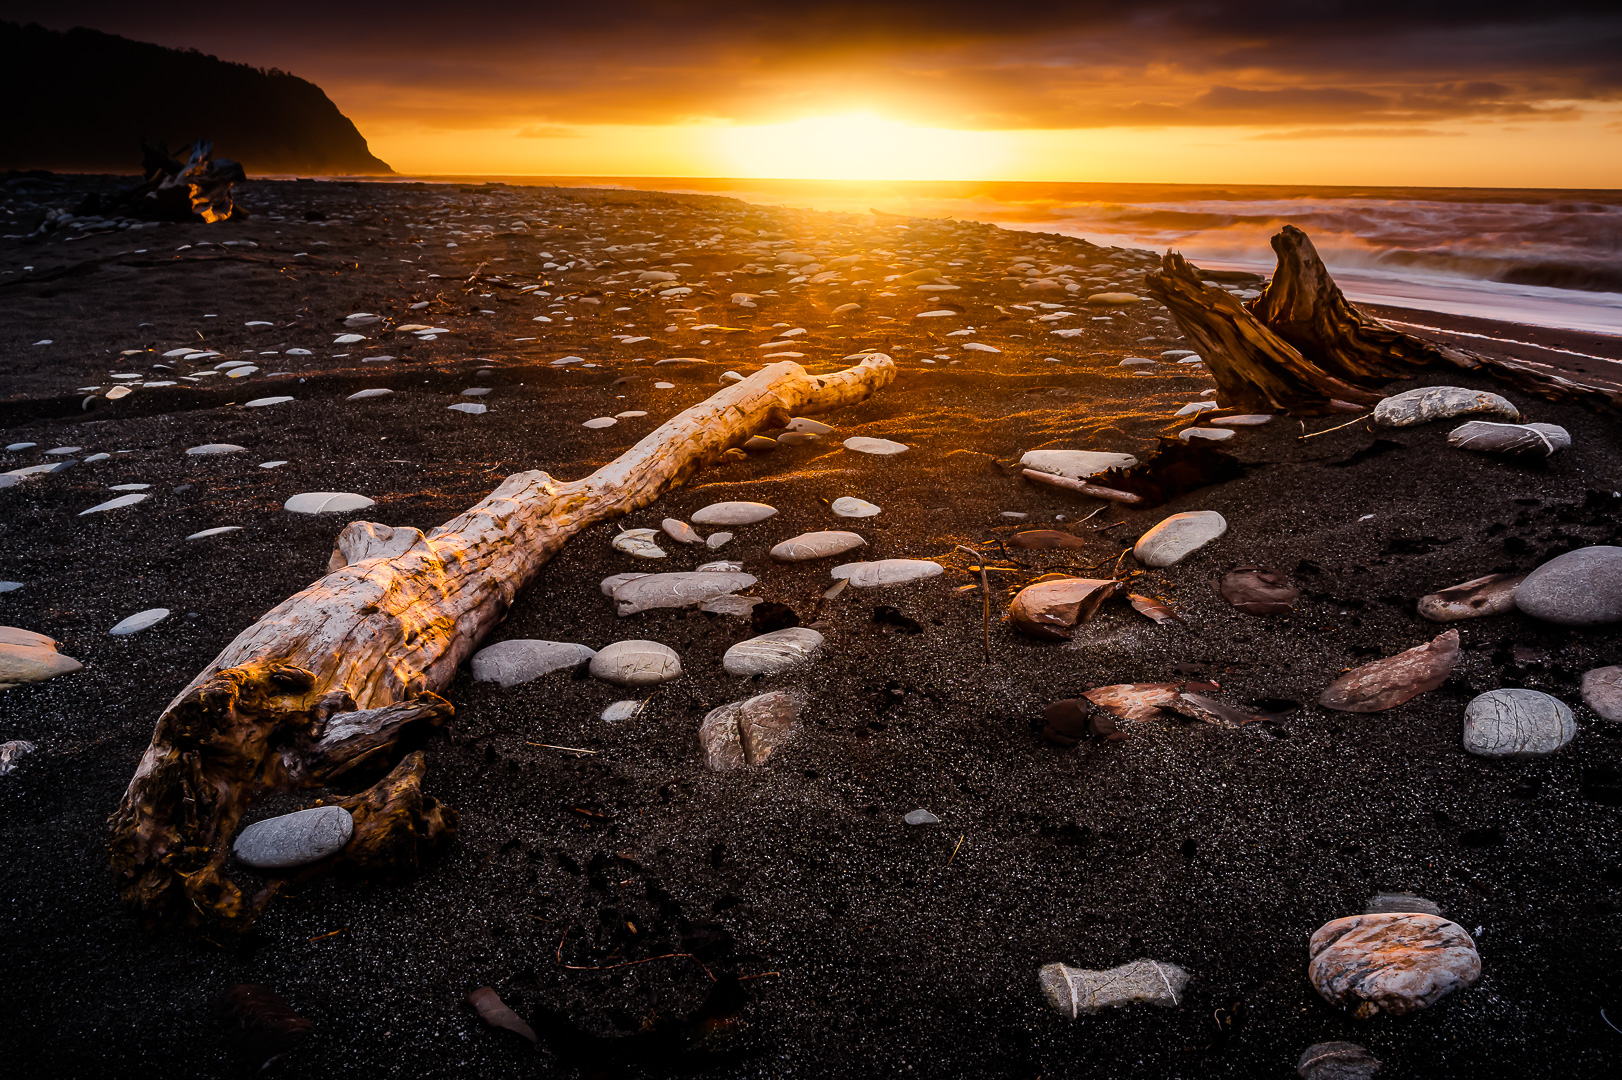 Driftwood and Fire by Adam Lack